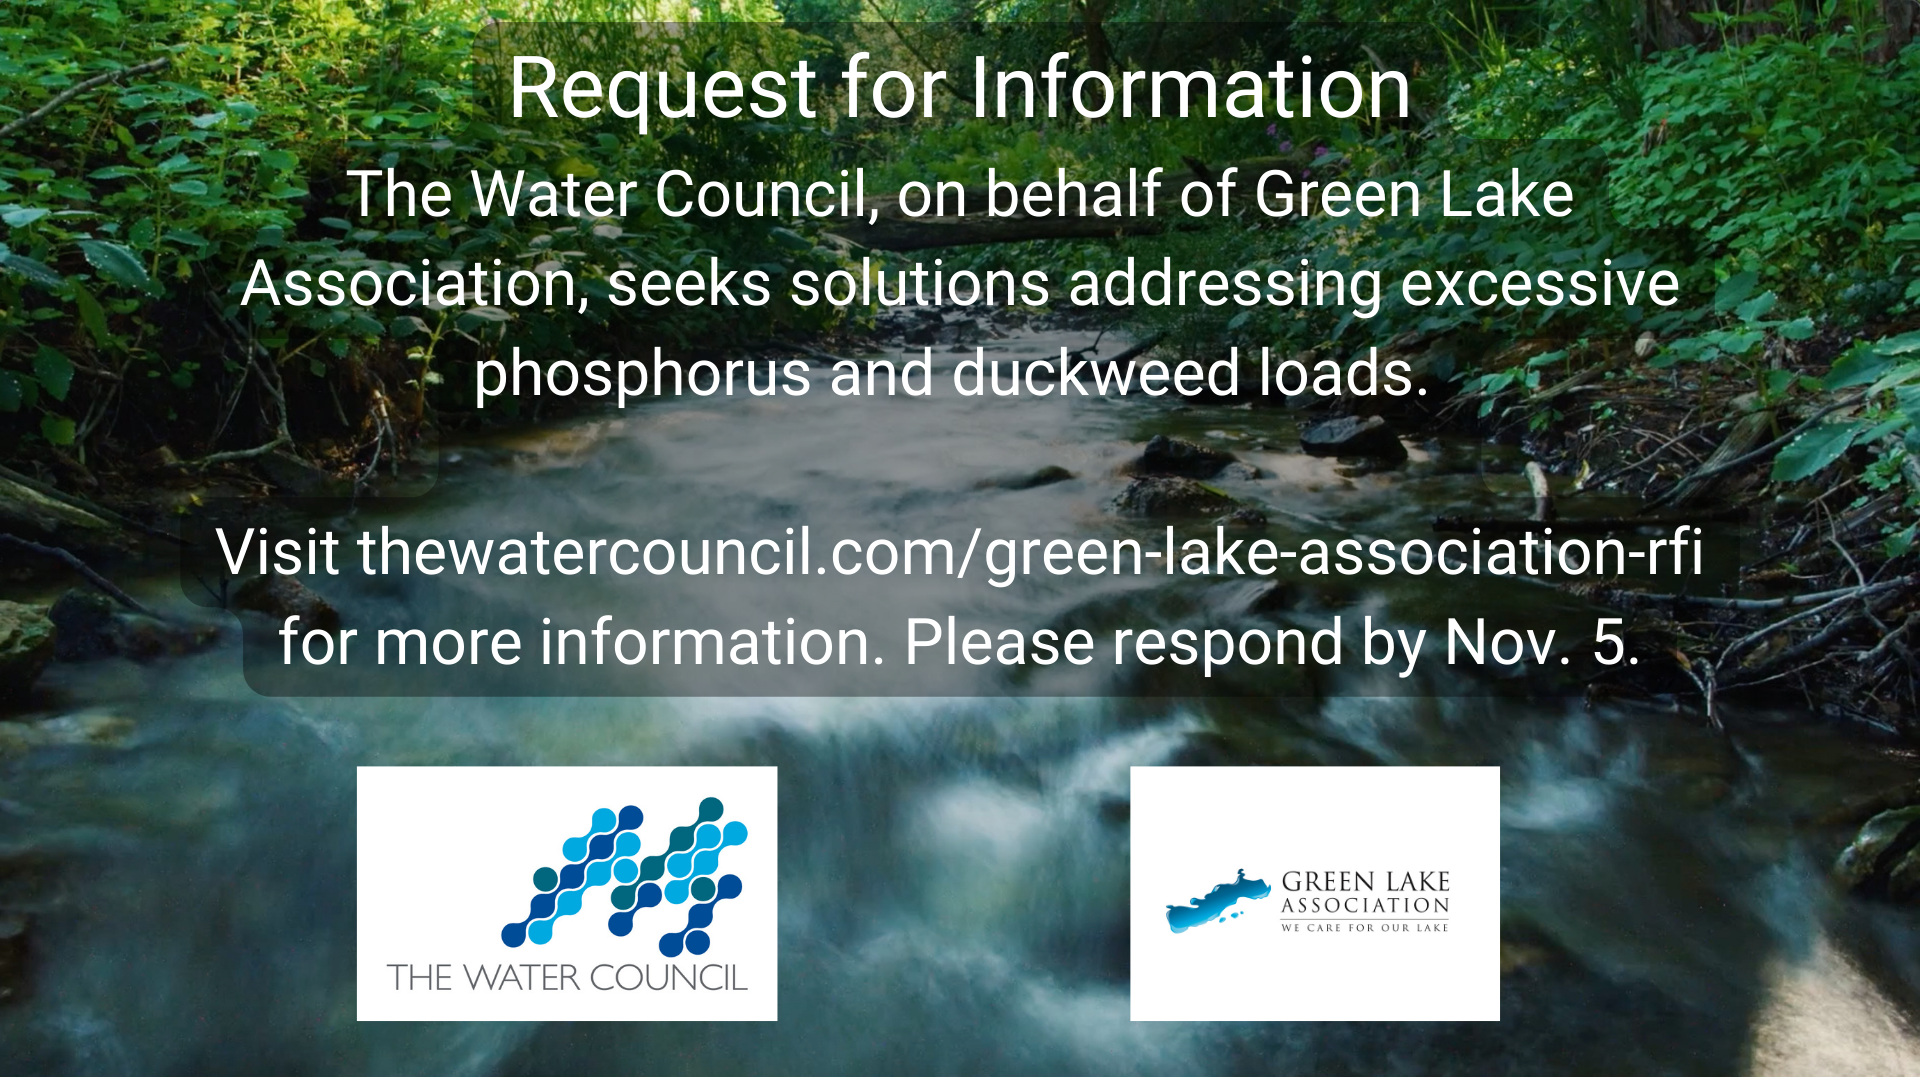 The Water Council is managing a Request for Information (RFI) seeking effective and proven technologies, materials, nature-based systems, or eng...